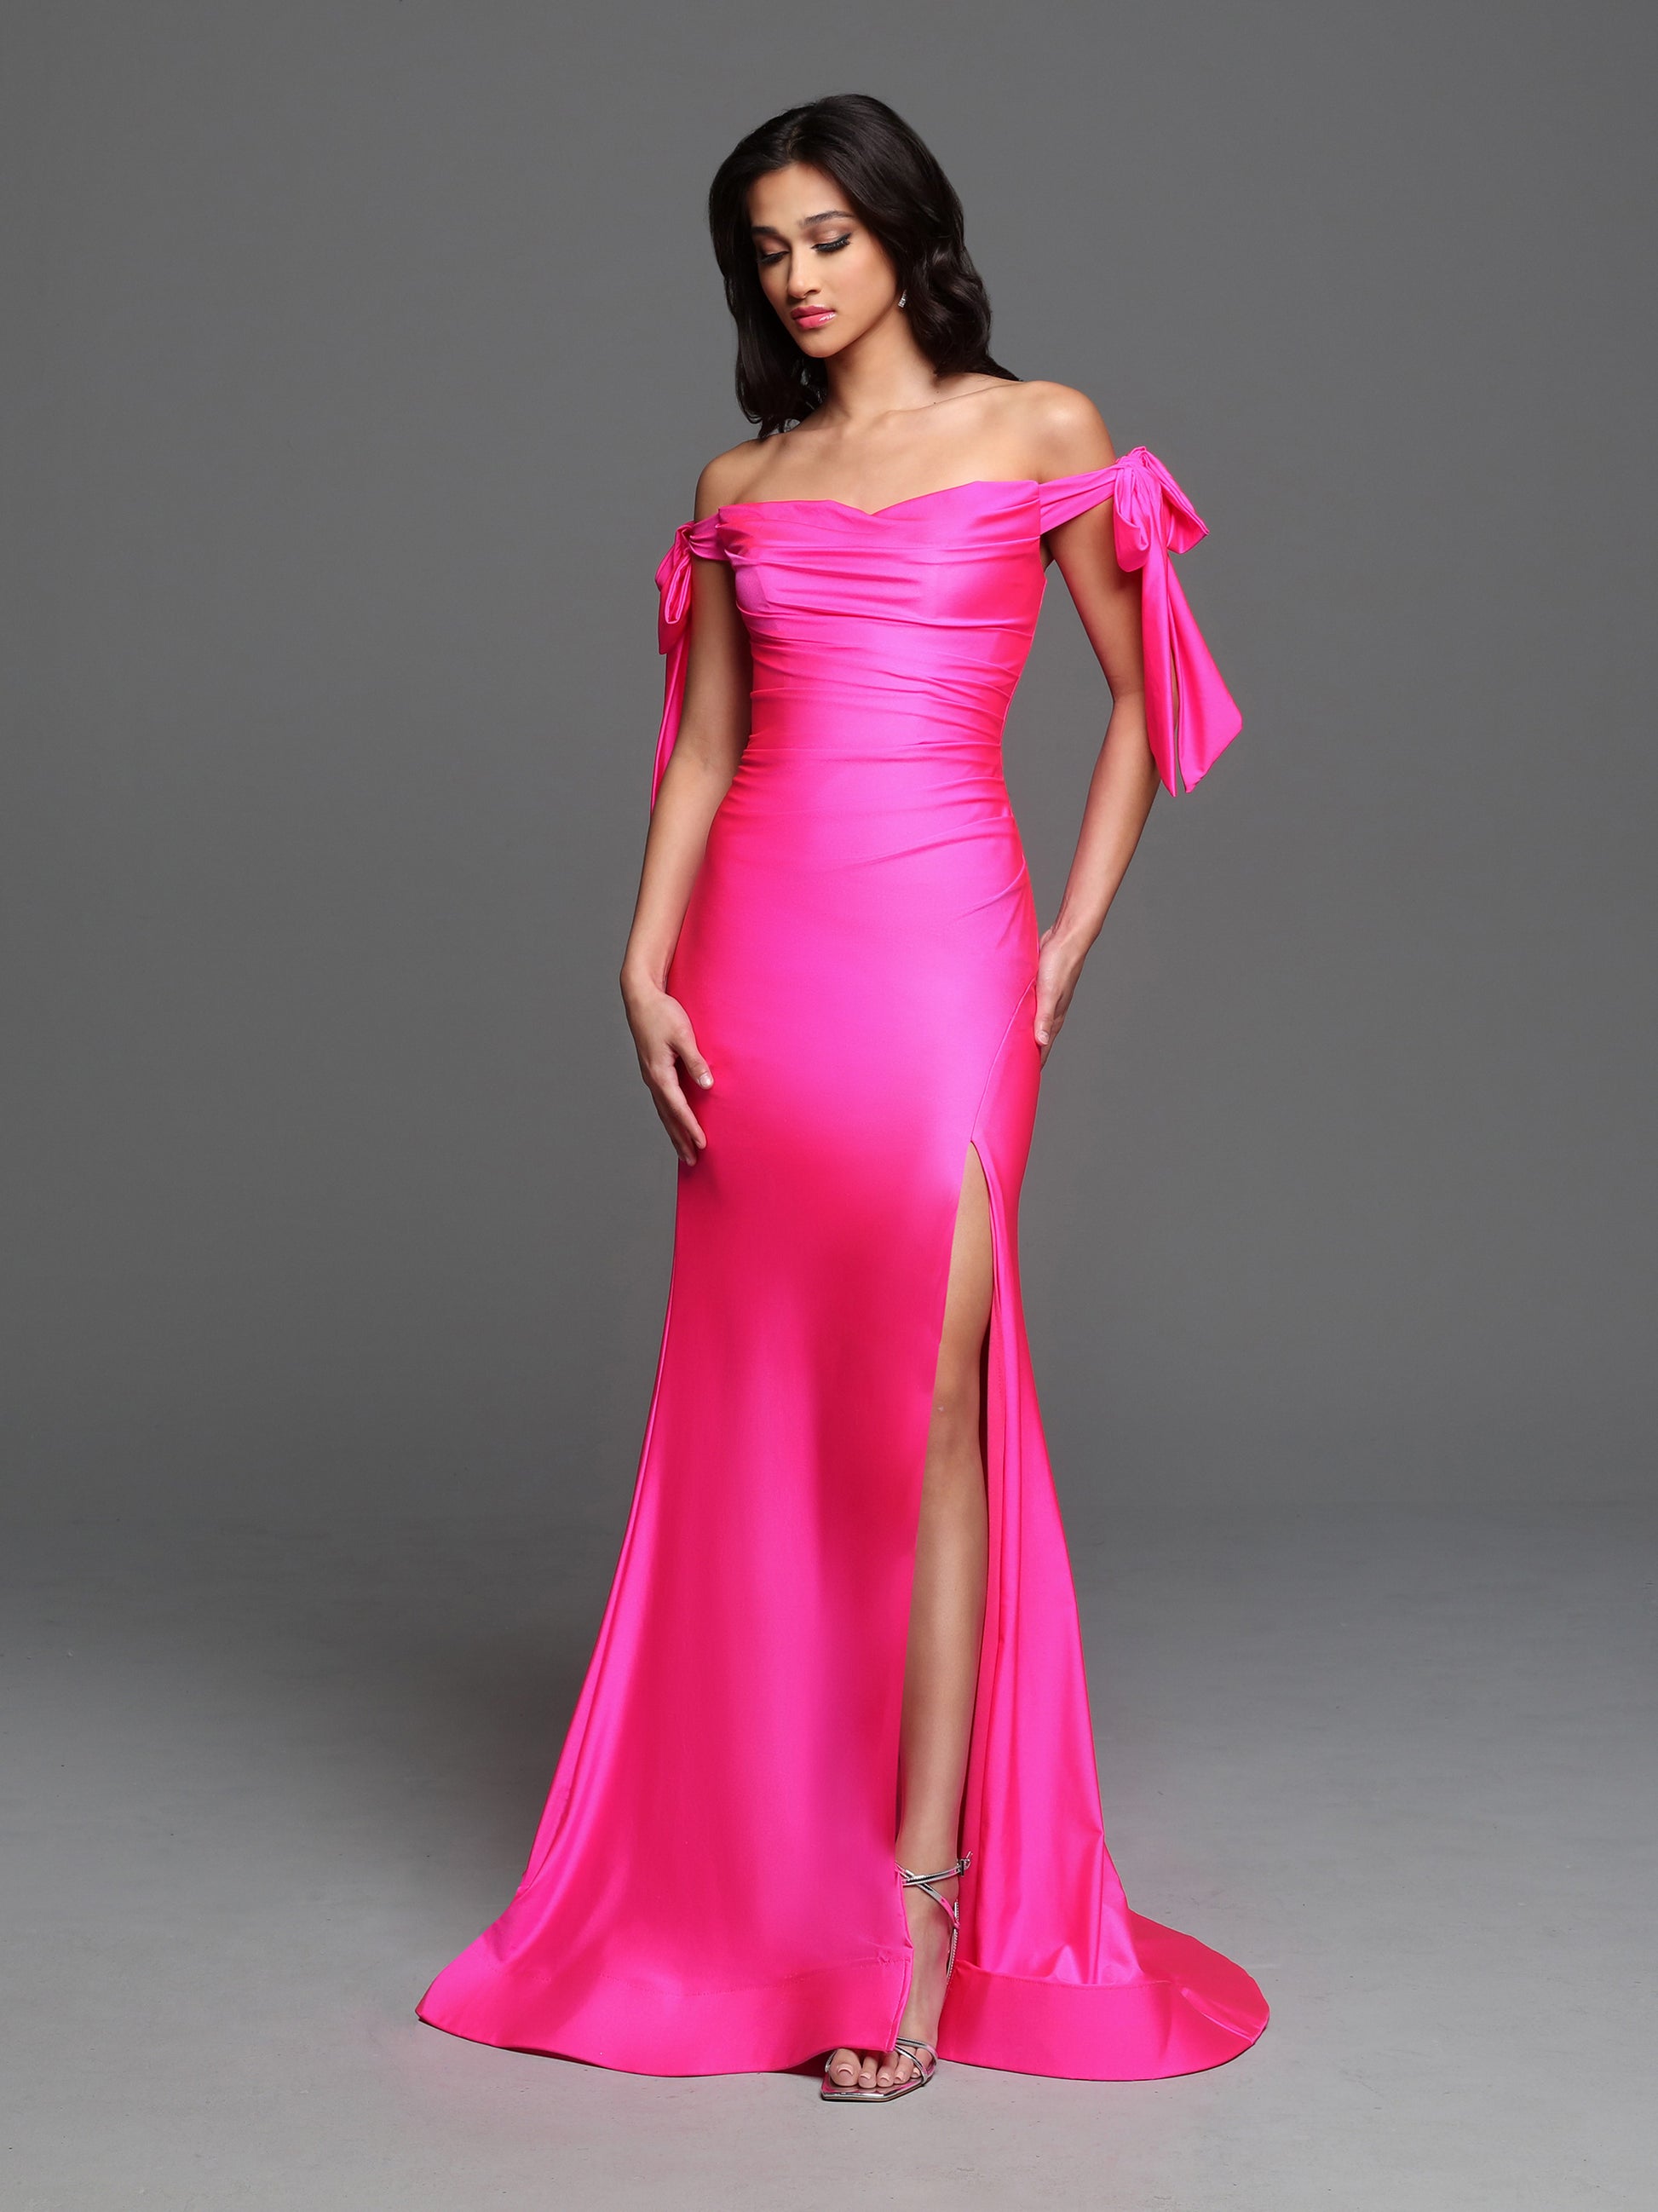 Sparkle Prom 72263 Long Fitted Jersey off the shoulder Bow Prom Dress Formal Slit Gown  Sizes: 0-20  Colors: Red, Emerald, Neon Pink